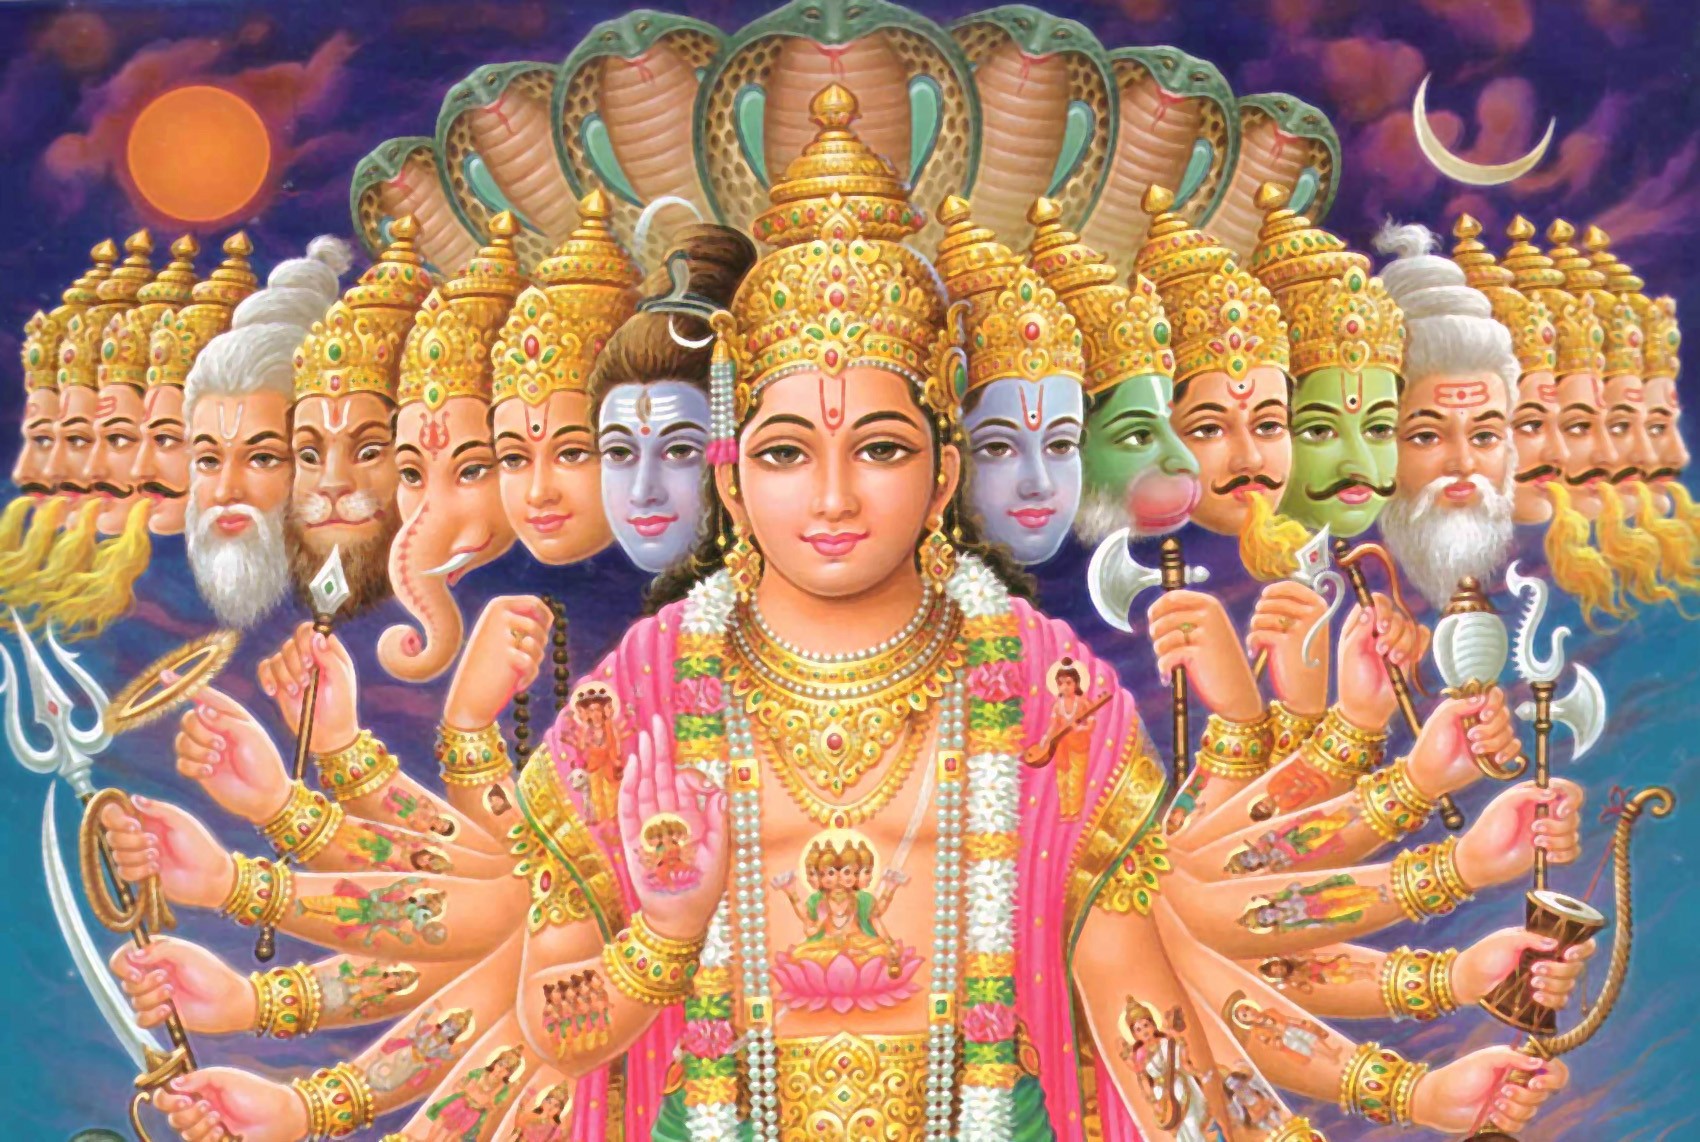 Many-armed Hindu goddess wallpapers and images - wallpapers, pictures